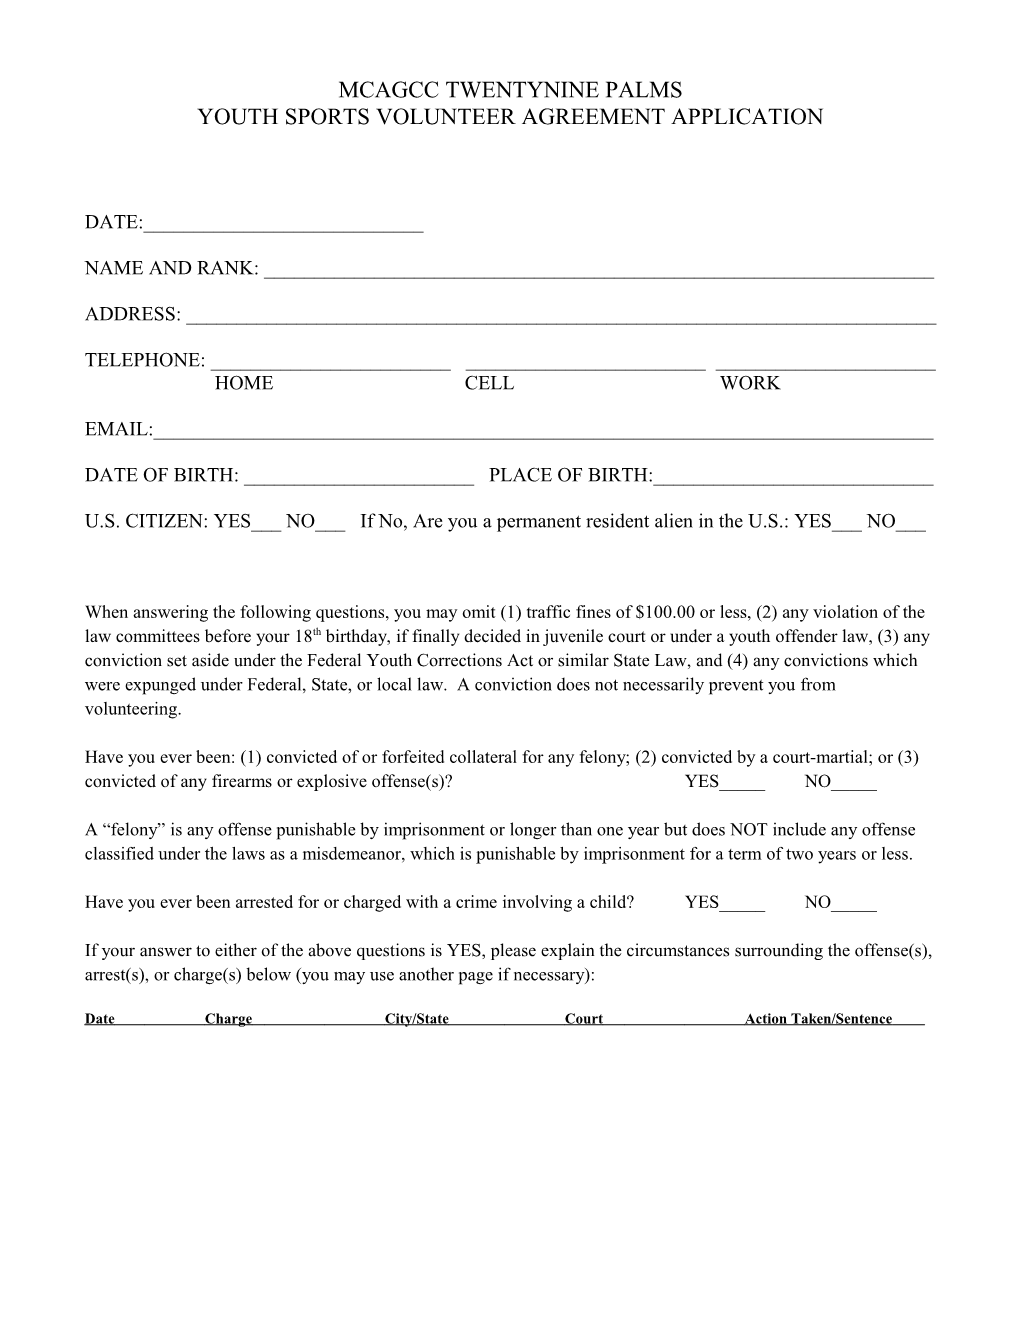 Youth Sports Volunteer Agreement Application